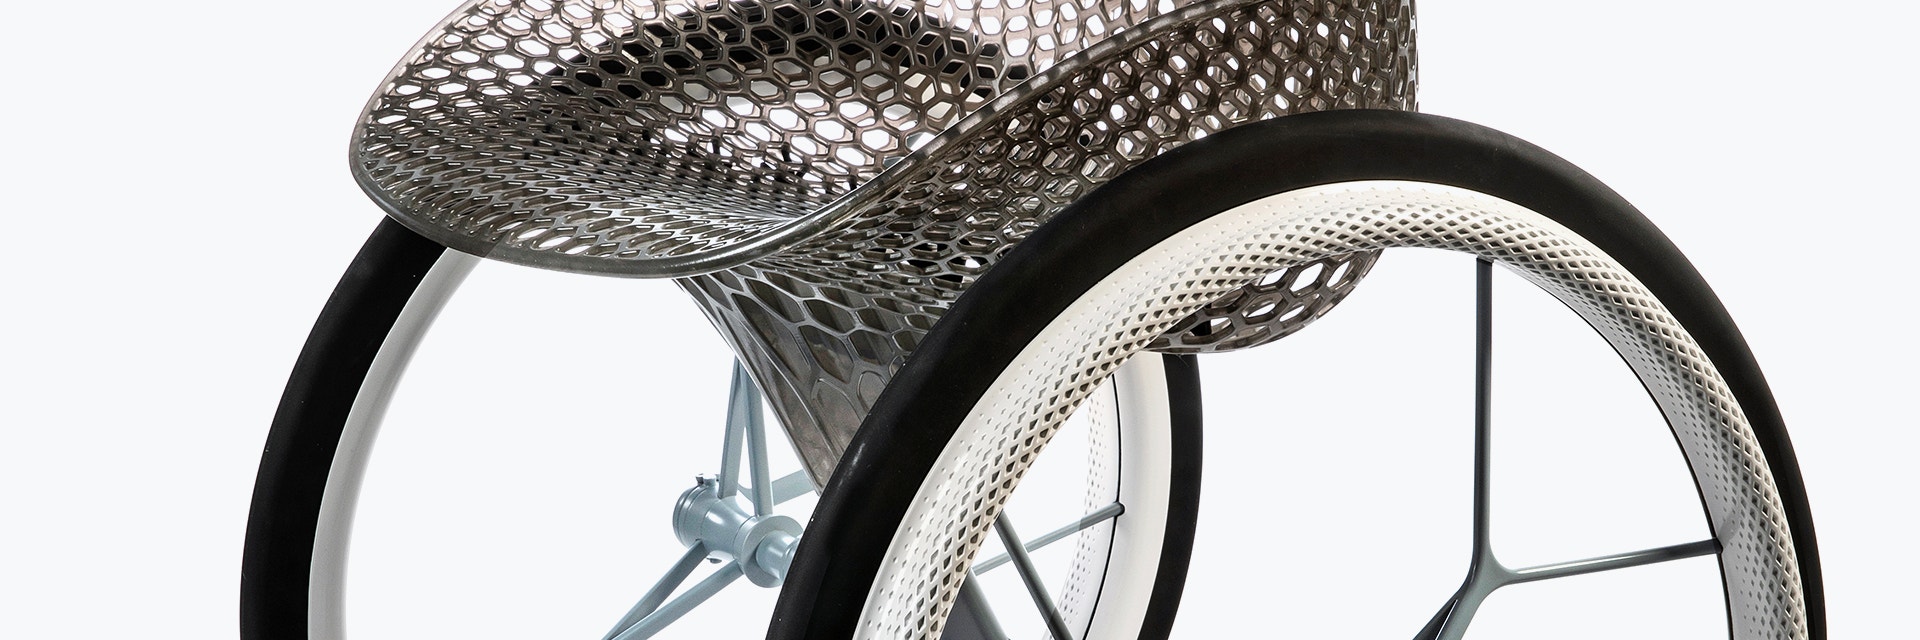 View of the middle section of a geometrical, 3D-printed chair seat from a 3D-printed prototype of a customized, futuristic-looking wheelchair, using multiple 3D printing materials. The seat is lattice-structured and made of a translucent gray resin. The wheel spokes are made of 3D-printed metal.